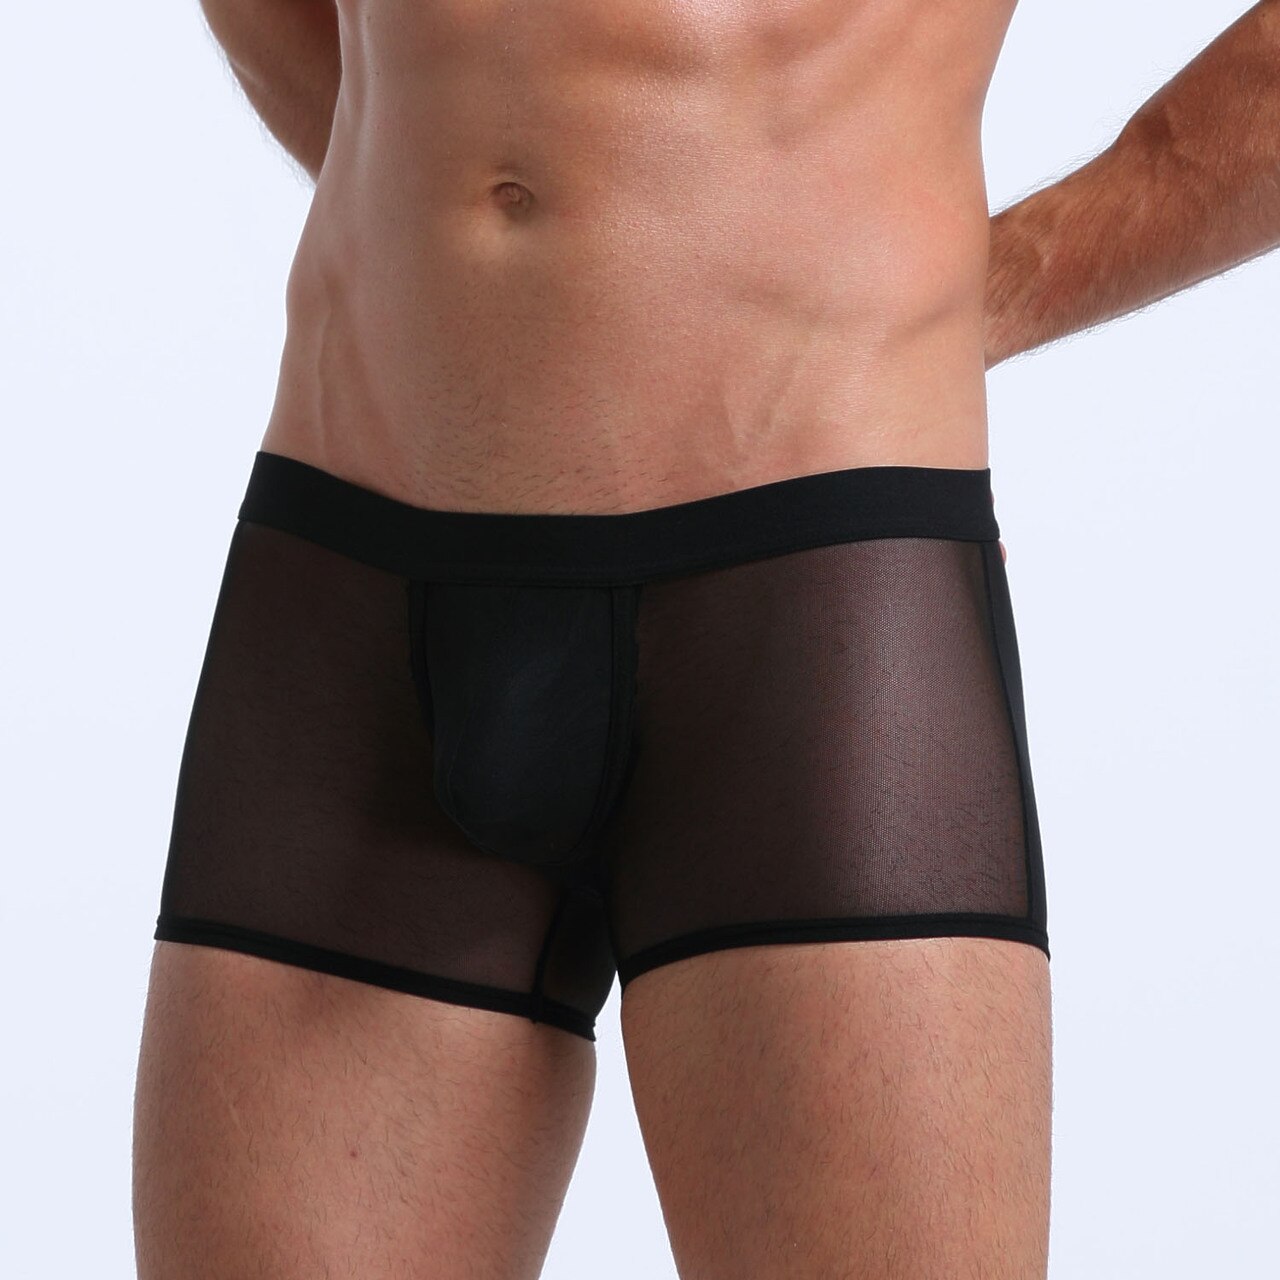 Mens Stretch Mesh Sheer Boxer Briefs with Pouch Front Black